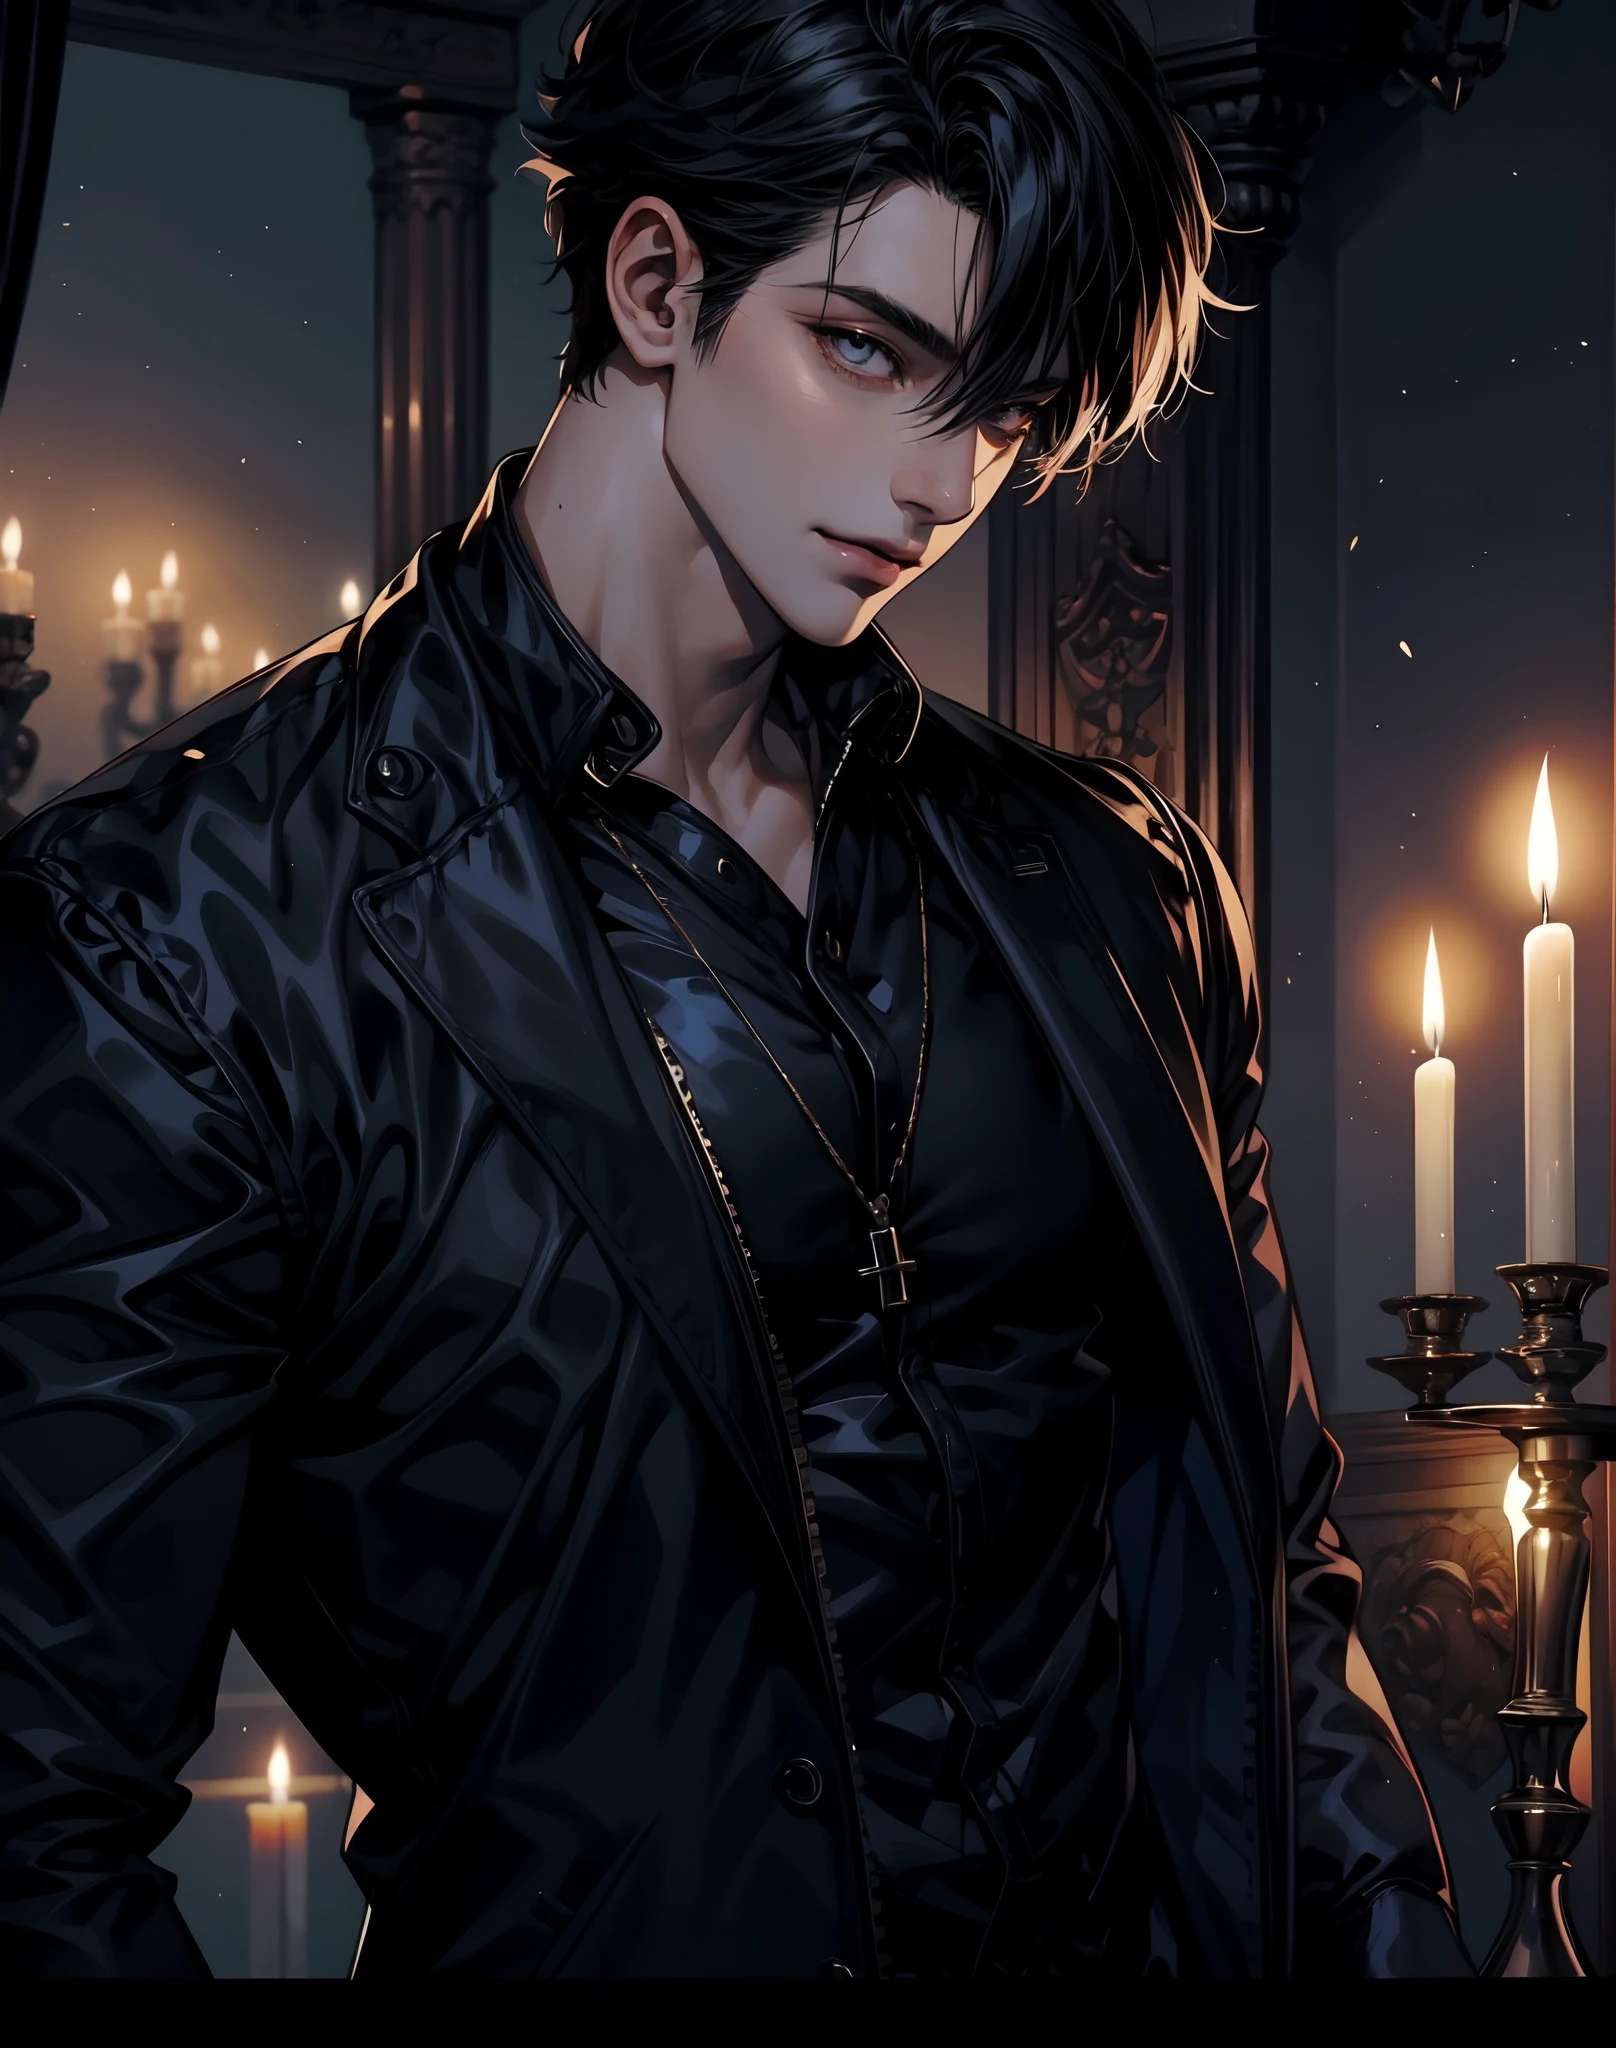 anime handsome boy muscular black latex suit holding a candle, evil smile, luxury bedroom background, dark_skin_handsome looking man, looking at view, full_body, standing pose,